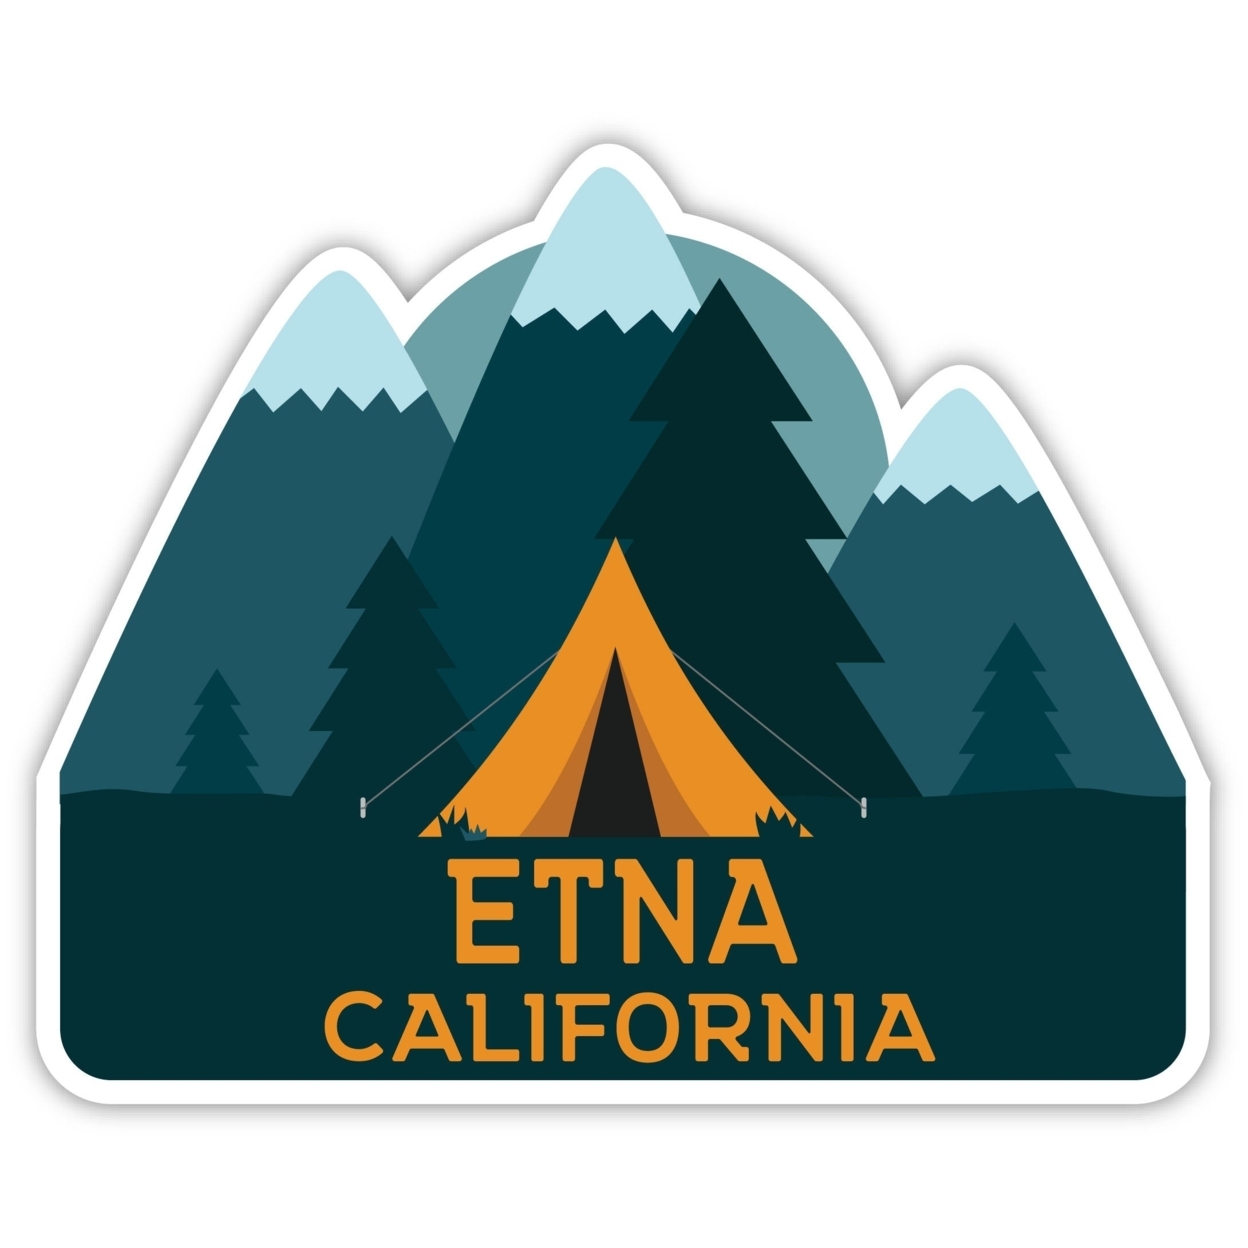 Etna California Souvenir Decorative Stickers (Choose Theme And Size) - 4-Pack, 4-Inch, Tent